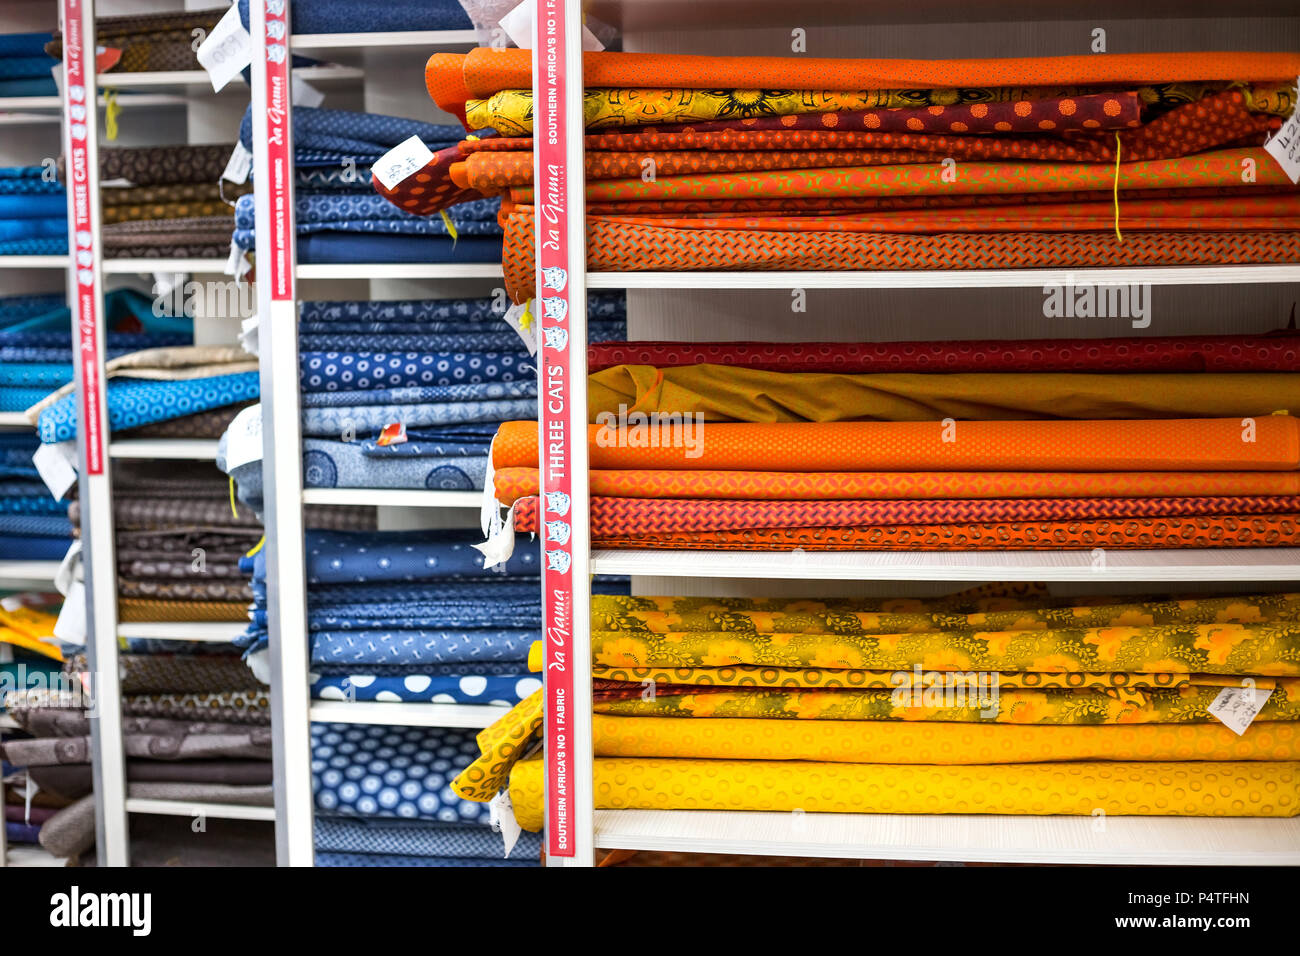 Pretoria, South Africa, June 7 - 2018: African textiles on display in fabric shop. Stock Photo